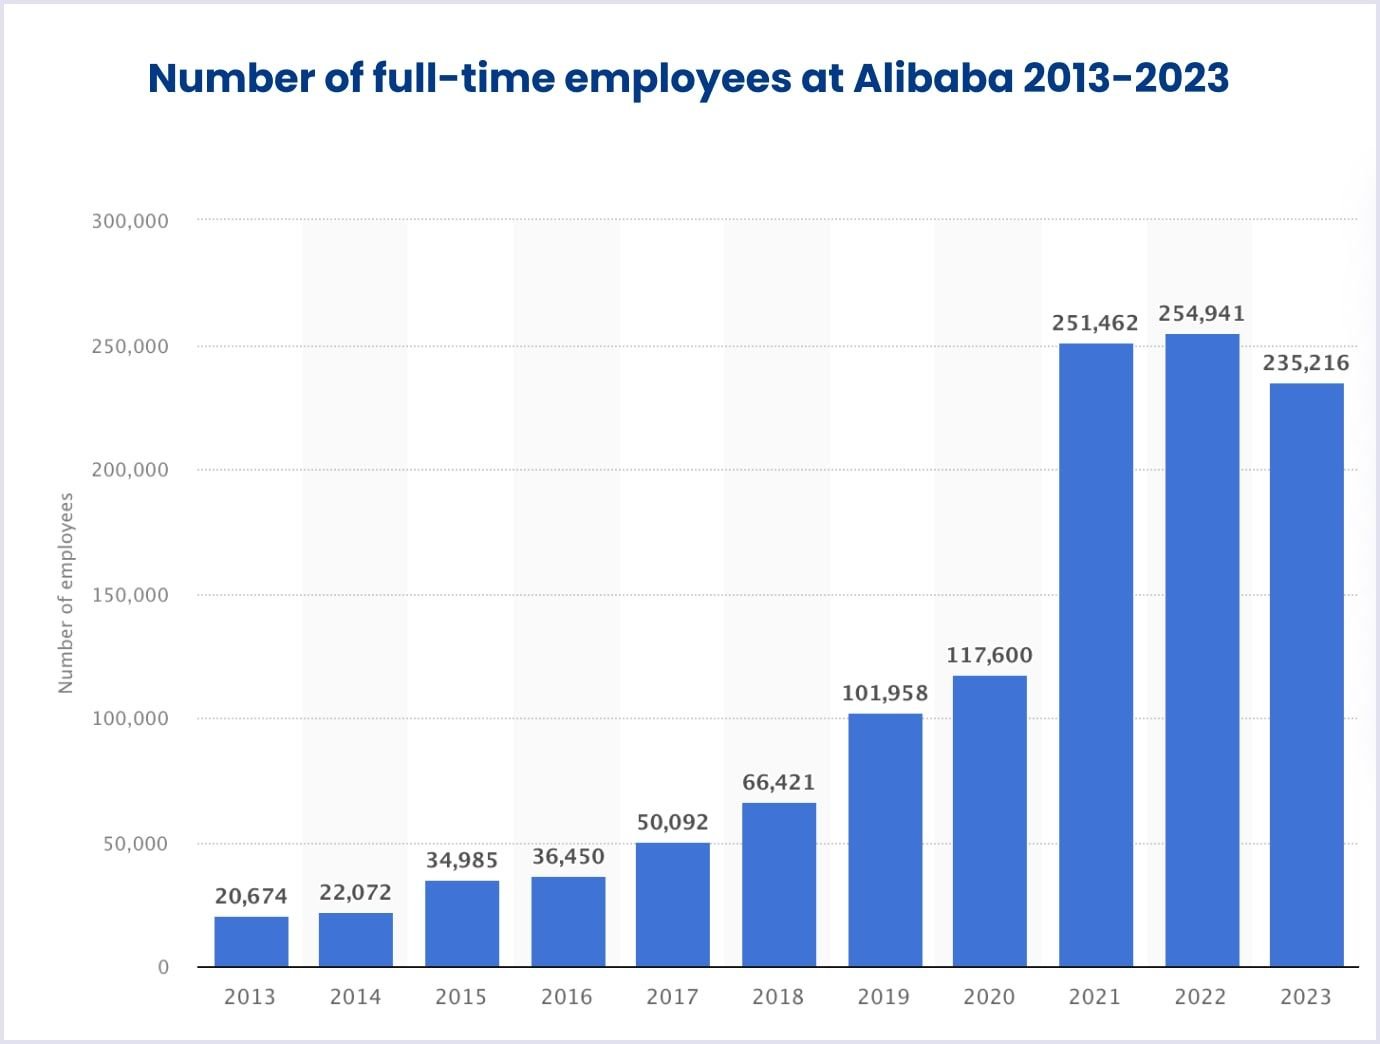 Number of full-time employees at Alibaba